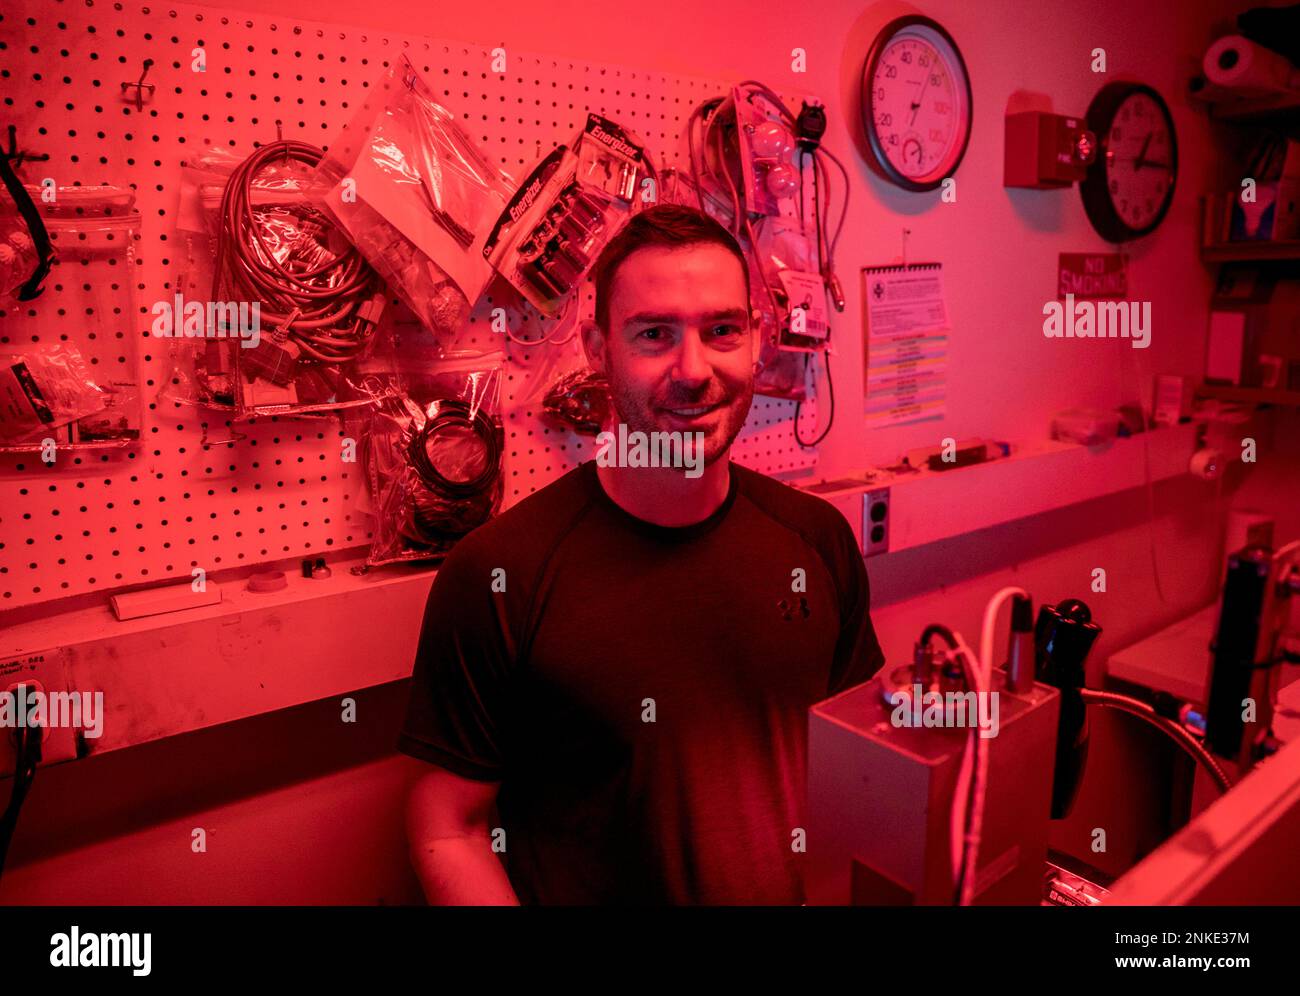 https://c8.alamy.com/comp/2NKE37M/geologist-alexander-sehlke-poses-for-a-portrait-inside-his-lab-at-nasas-ames-research-center-in-mountain-view-calif-wednesday-march-20-2019-sehlke-will-be-one-of-the-researchers-studying-thermoluminescence-on-frozen-apollo-11-samples-in-july-jessica-christiansan-francisco-chronicle-via-ap-2NKE37M.jpg